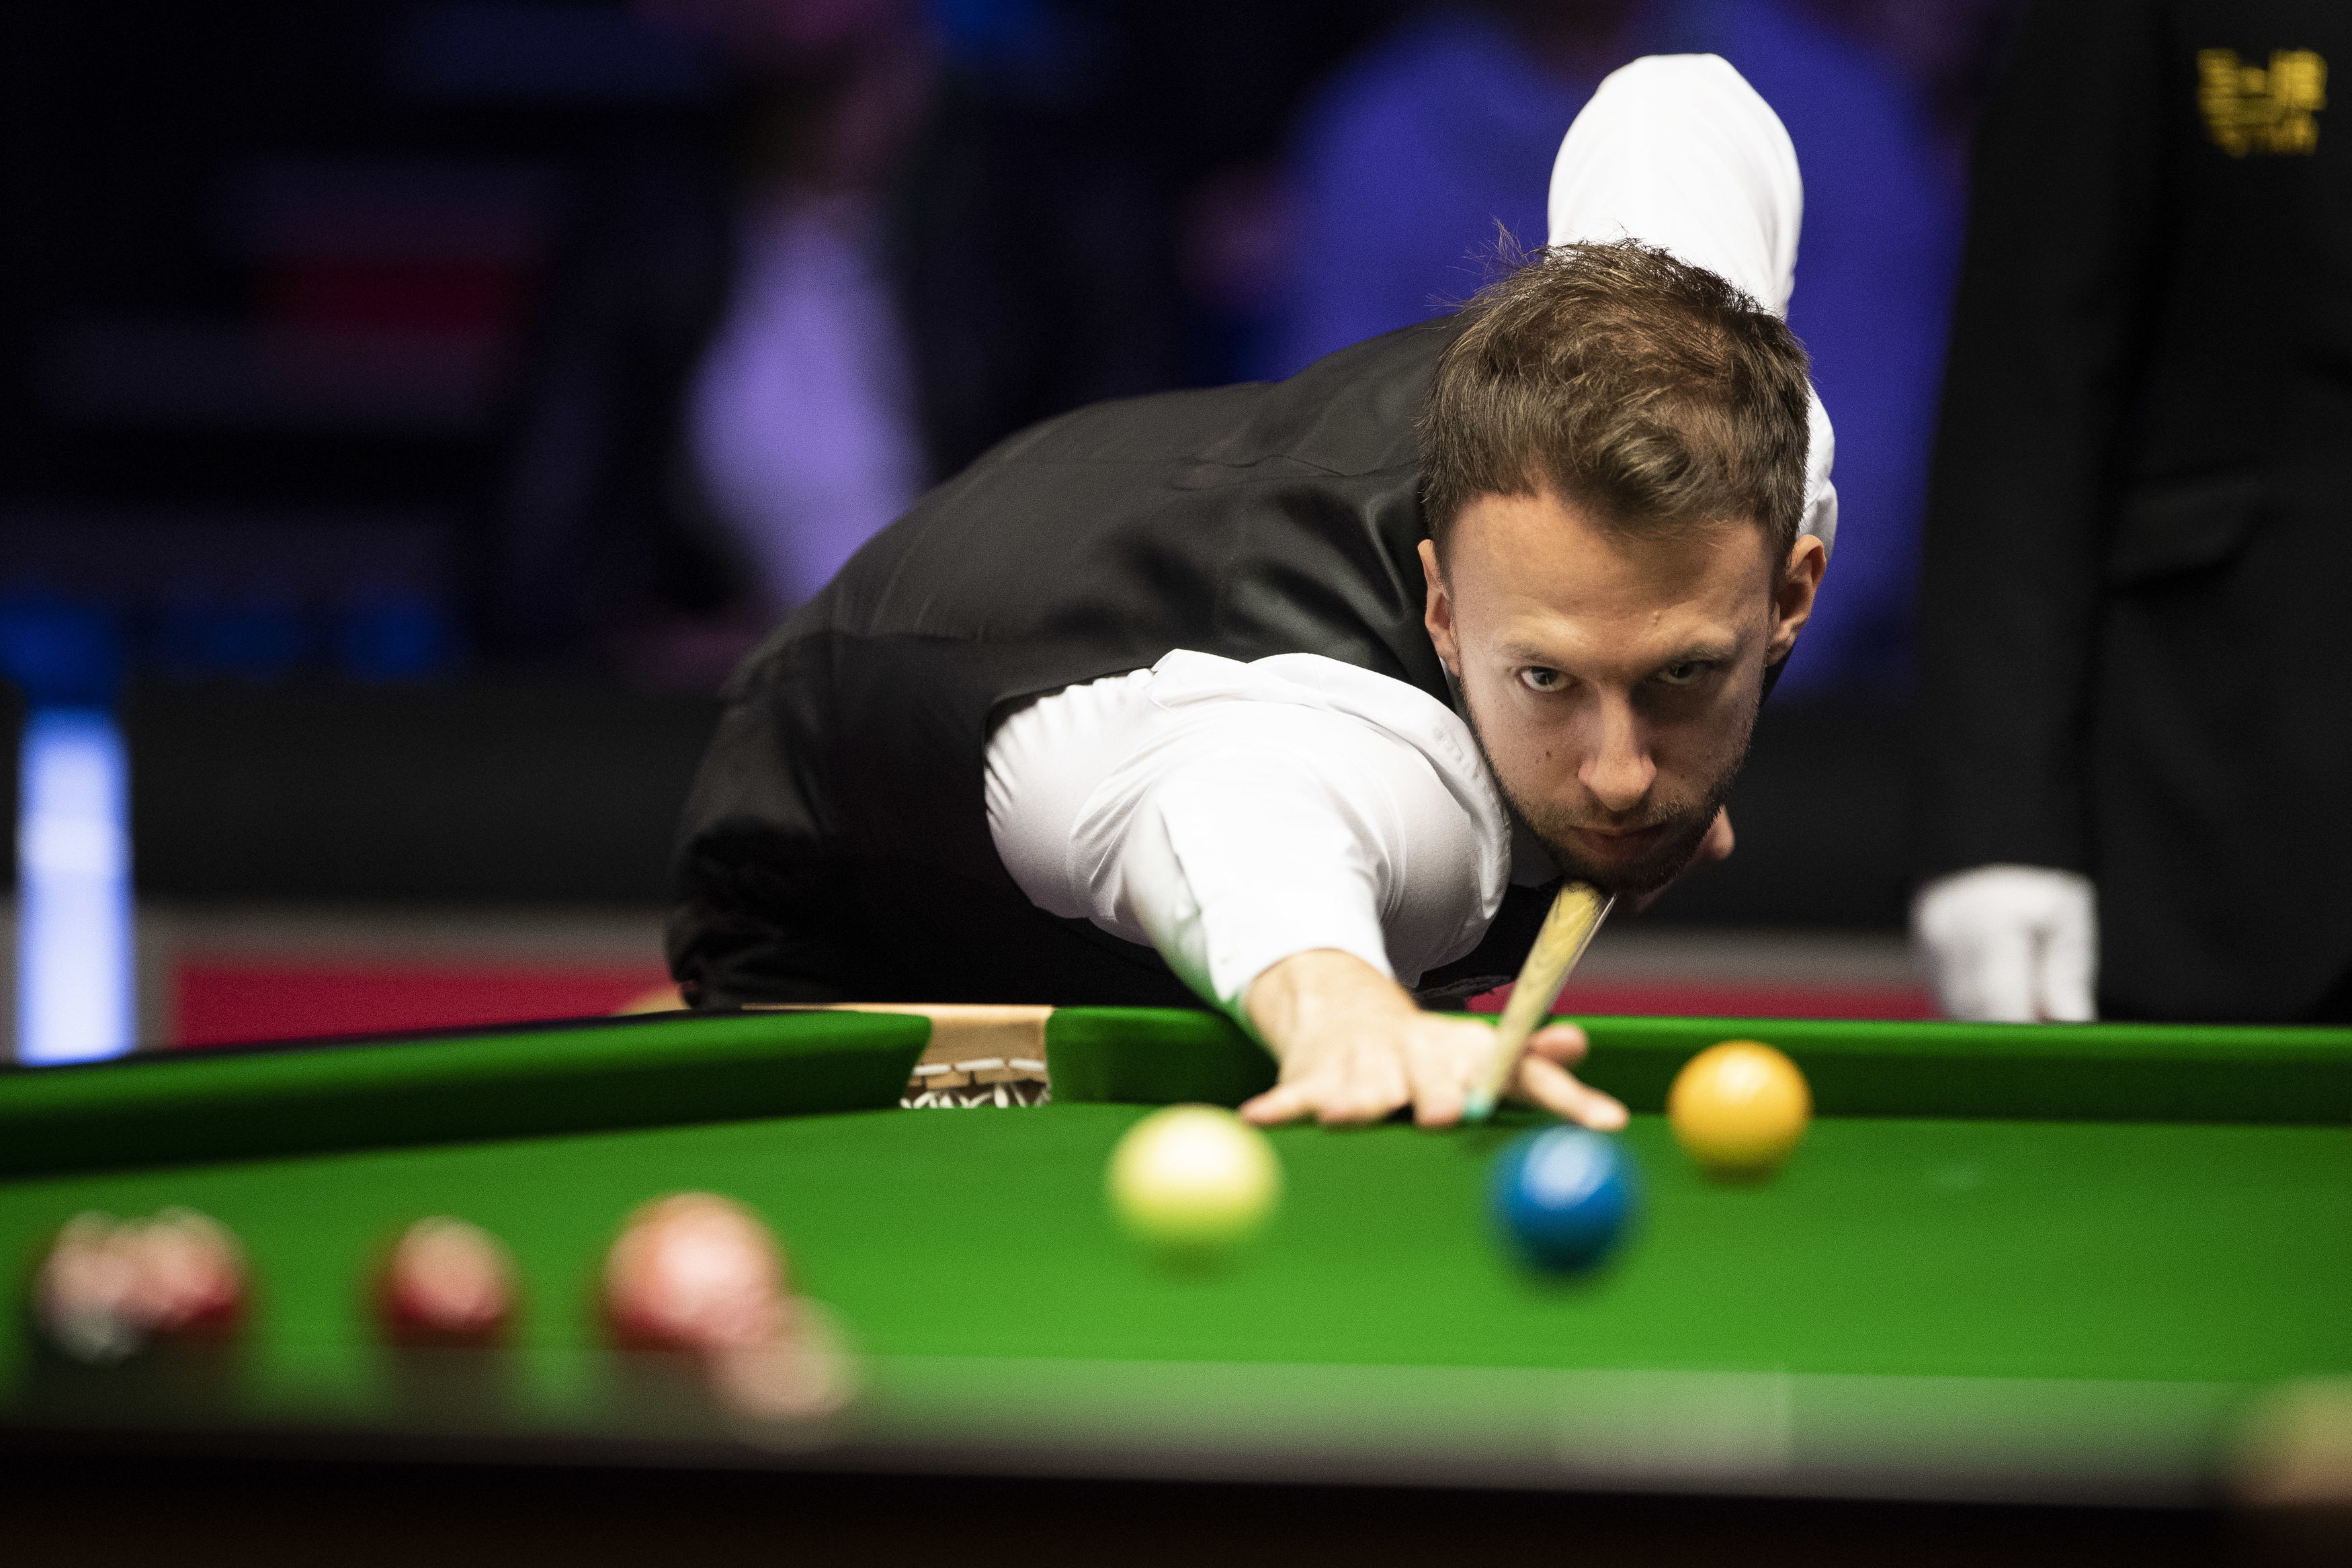 German Masters snooker Schedule, results, how to watch on TV